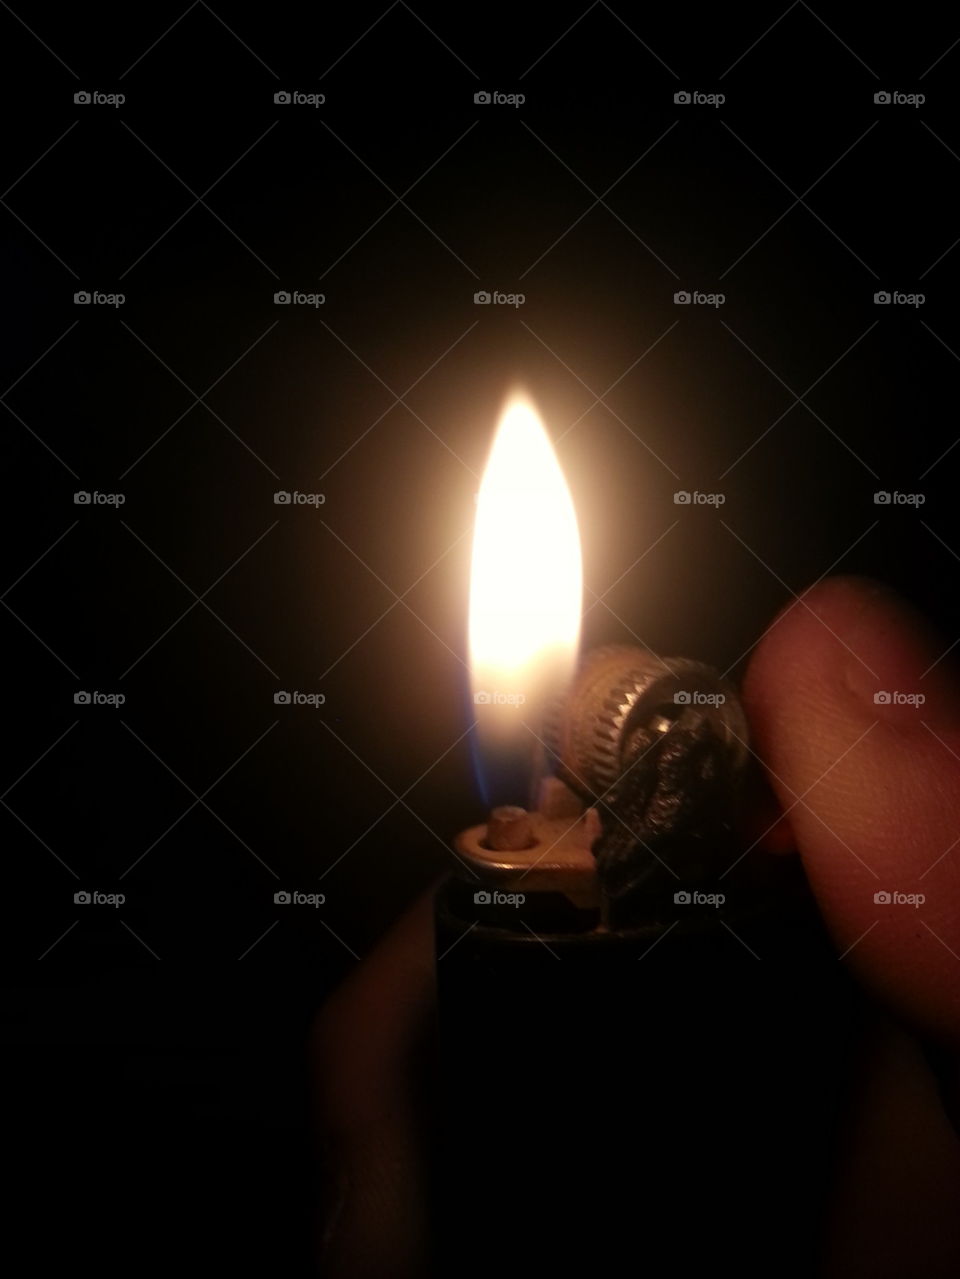 A Small Light Can Guide Your Way